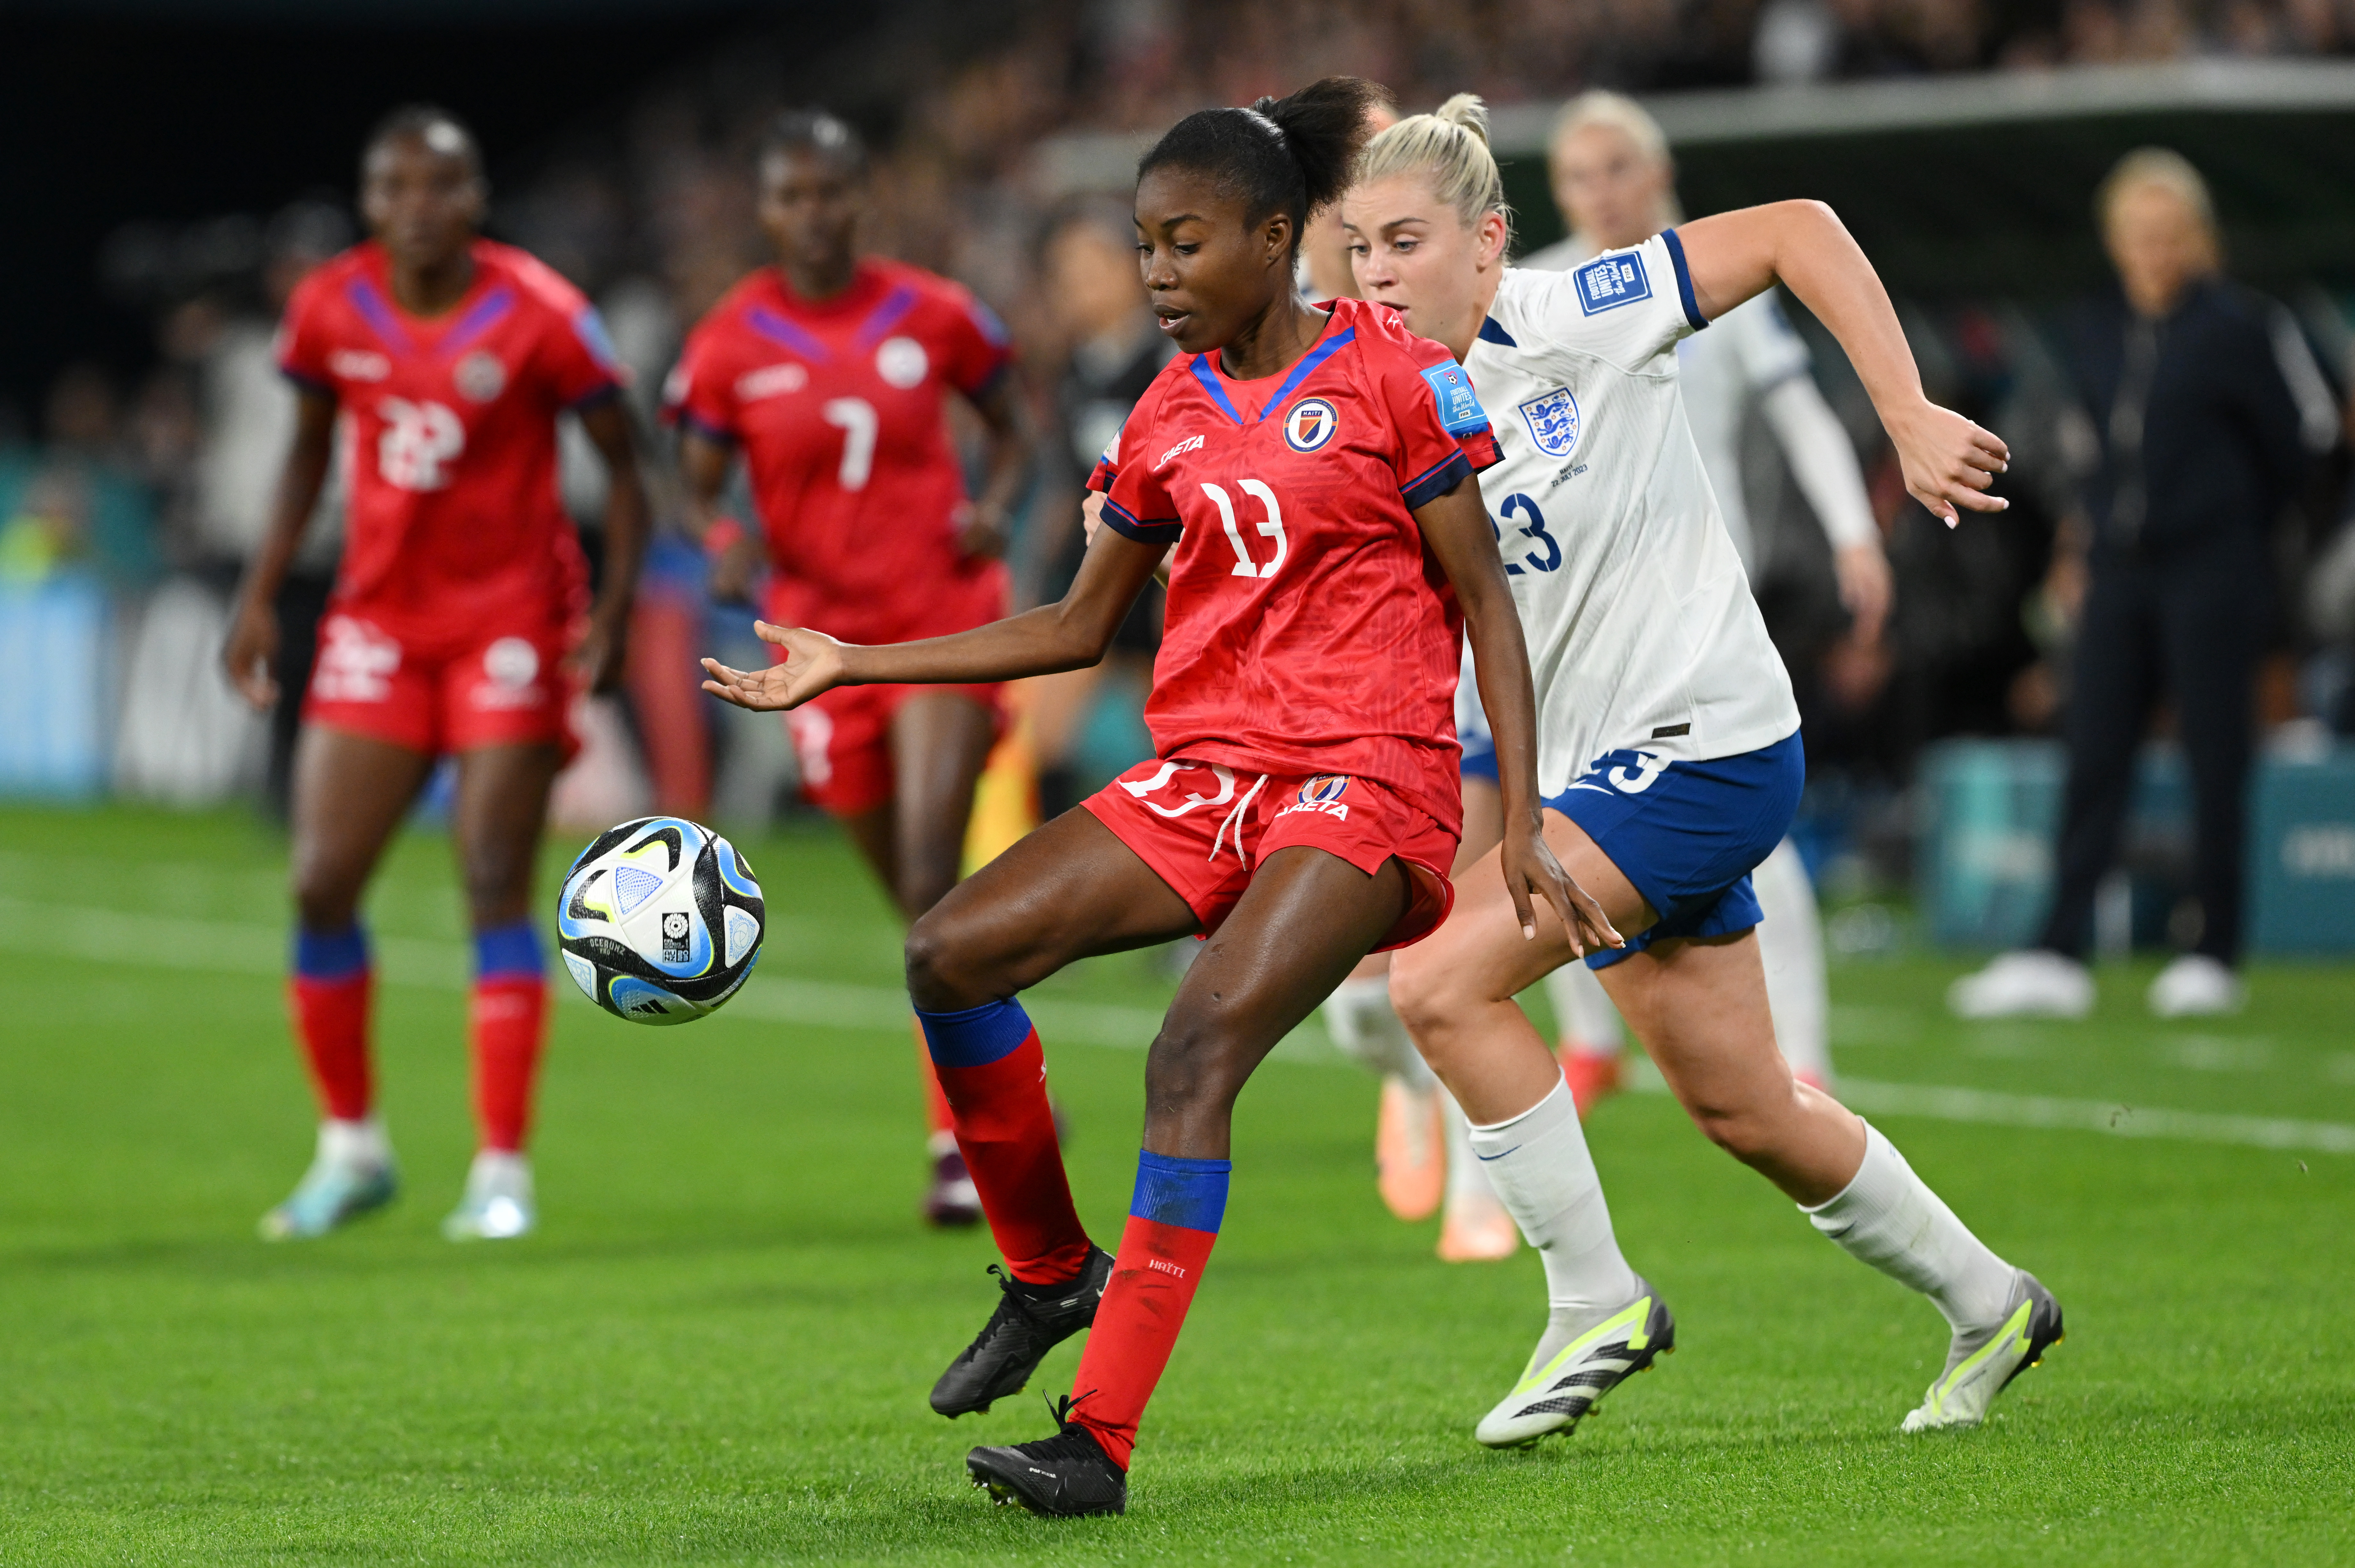 FIFA expanded the 2023 Women's World Cup to 32 teams. : NPR